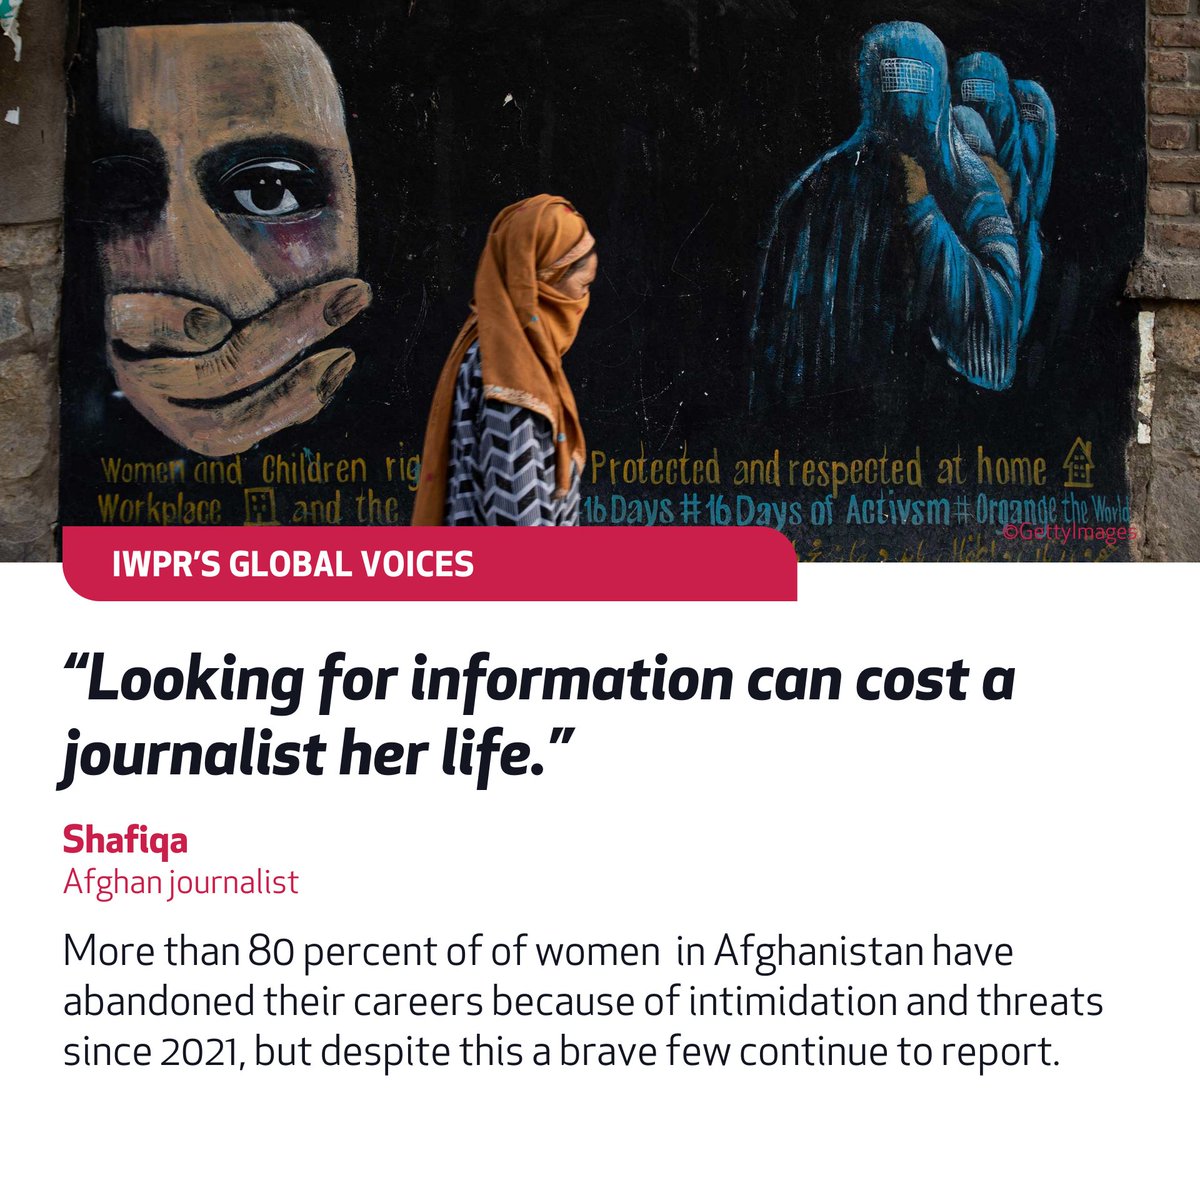 For women journalists in Afghanistan, simply showing up to work is an act of defiance. IWPR works with Afghan women-led newsroom @ZanTimes to give a platform to Afghan women. Read about their editor-in-chief @ZahraYusufi story: iwpr.net/global-voices/…